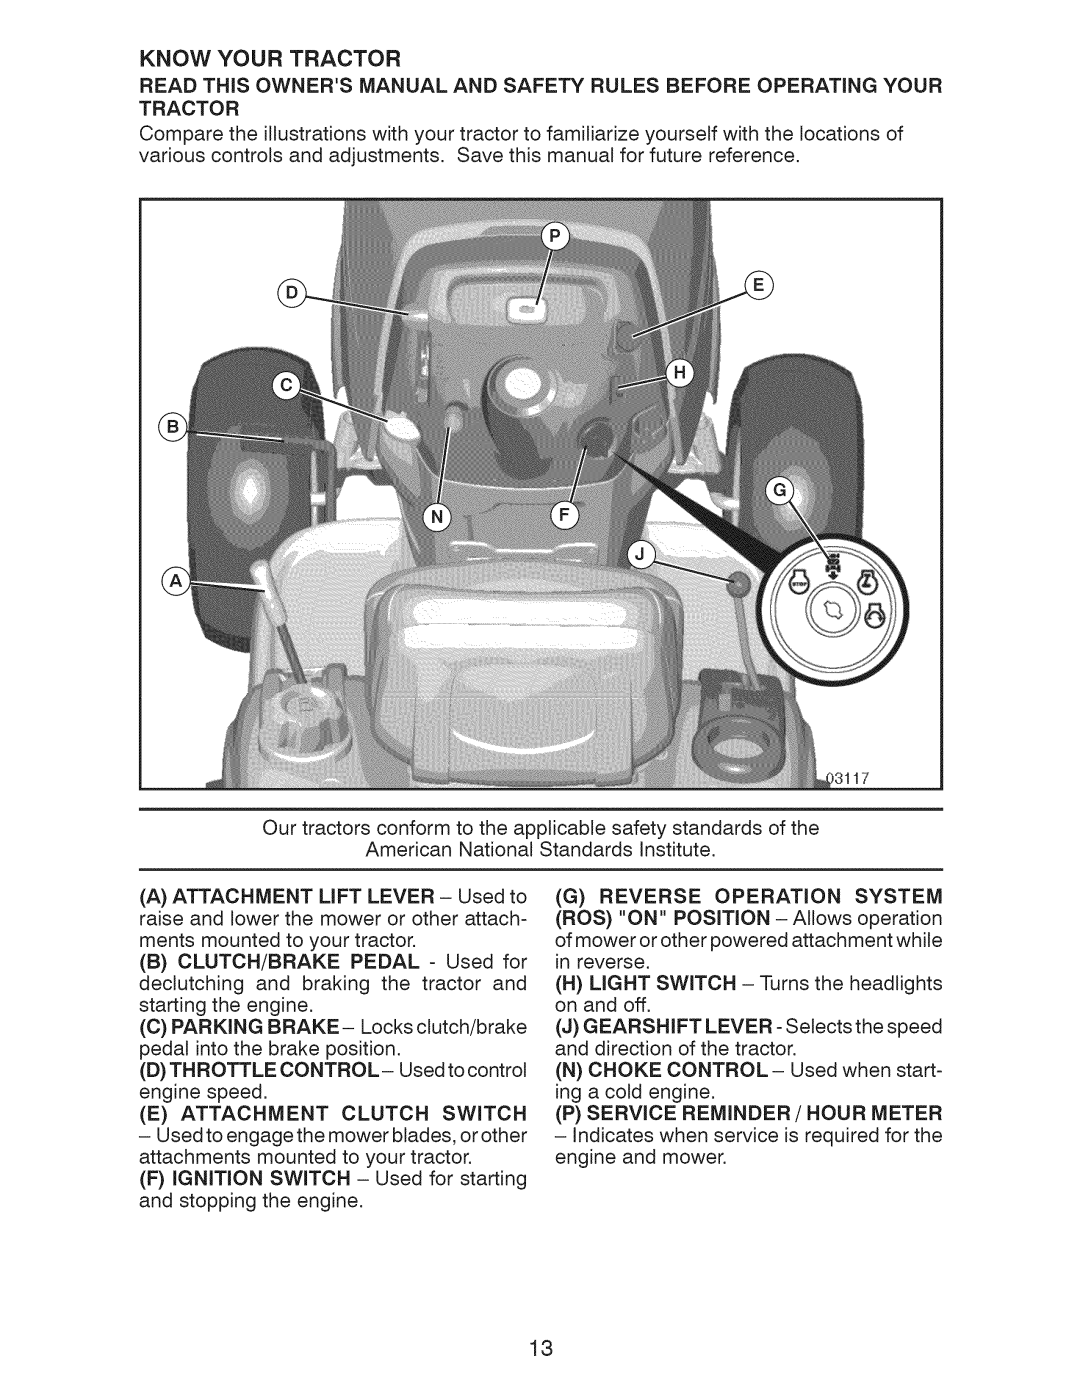 Craftsman 917.28955 owner manual Know Your Tractor, Pservice Reminder / Hour Meter 